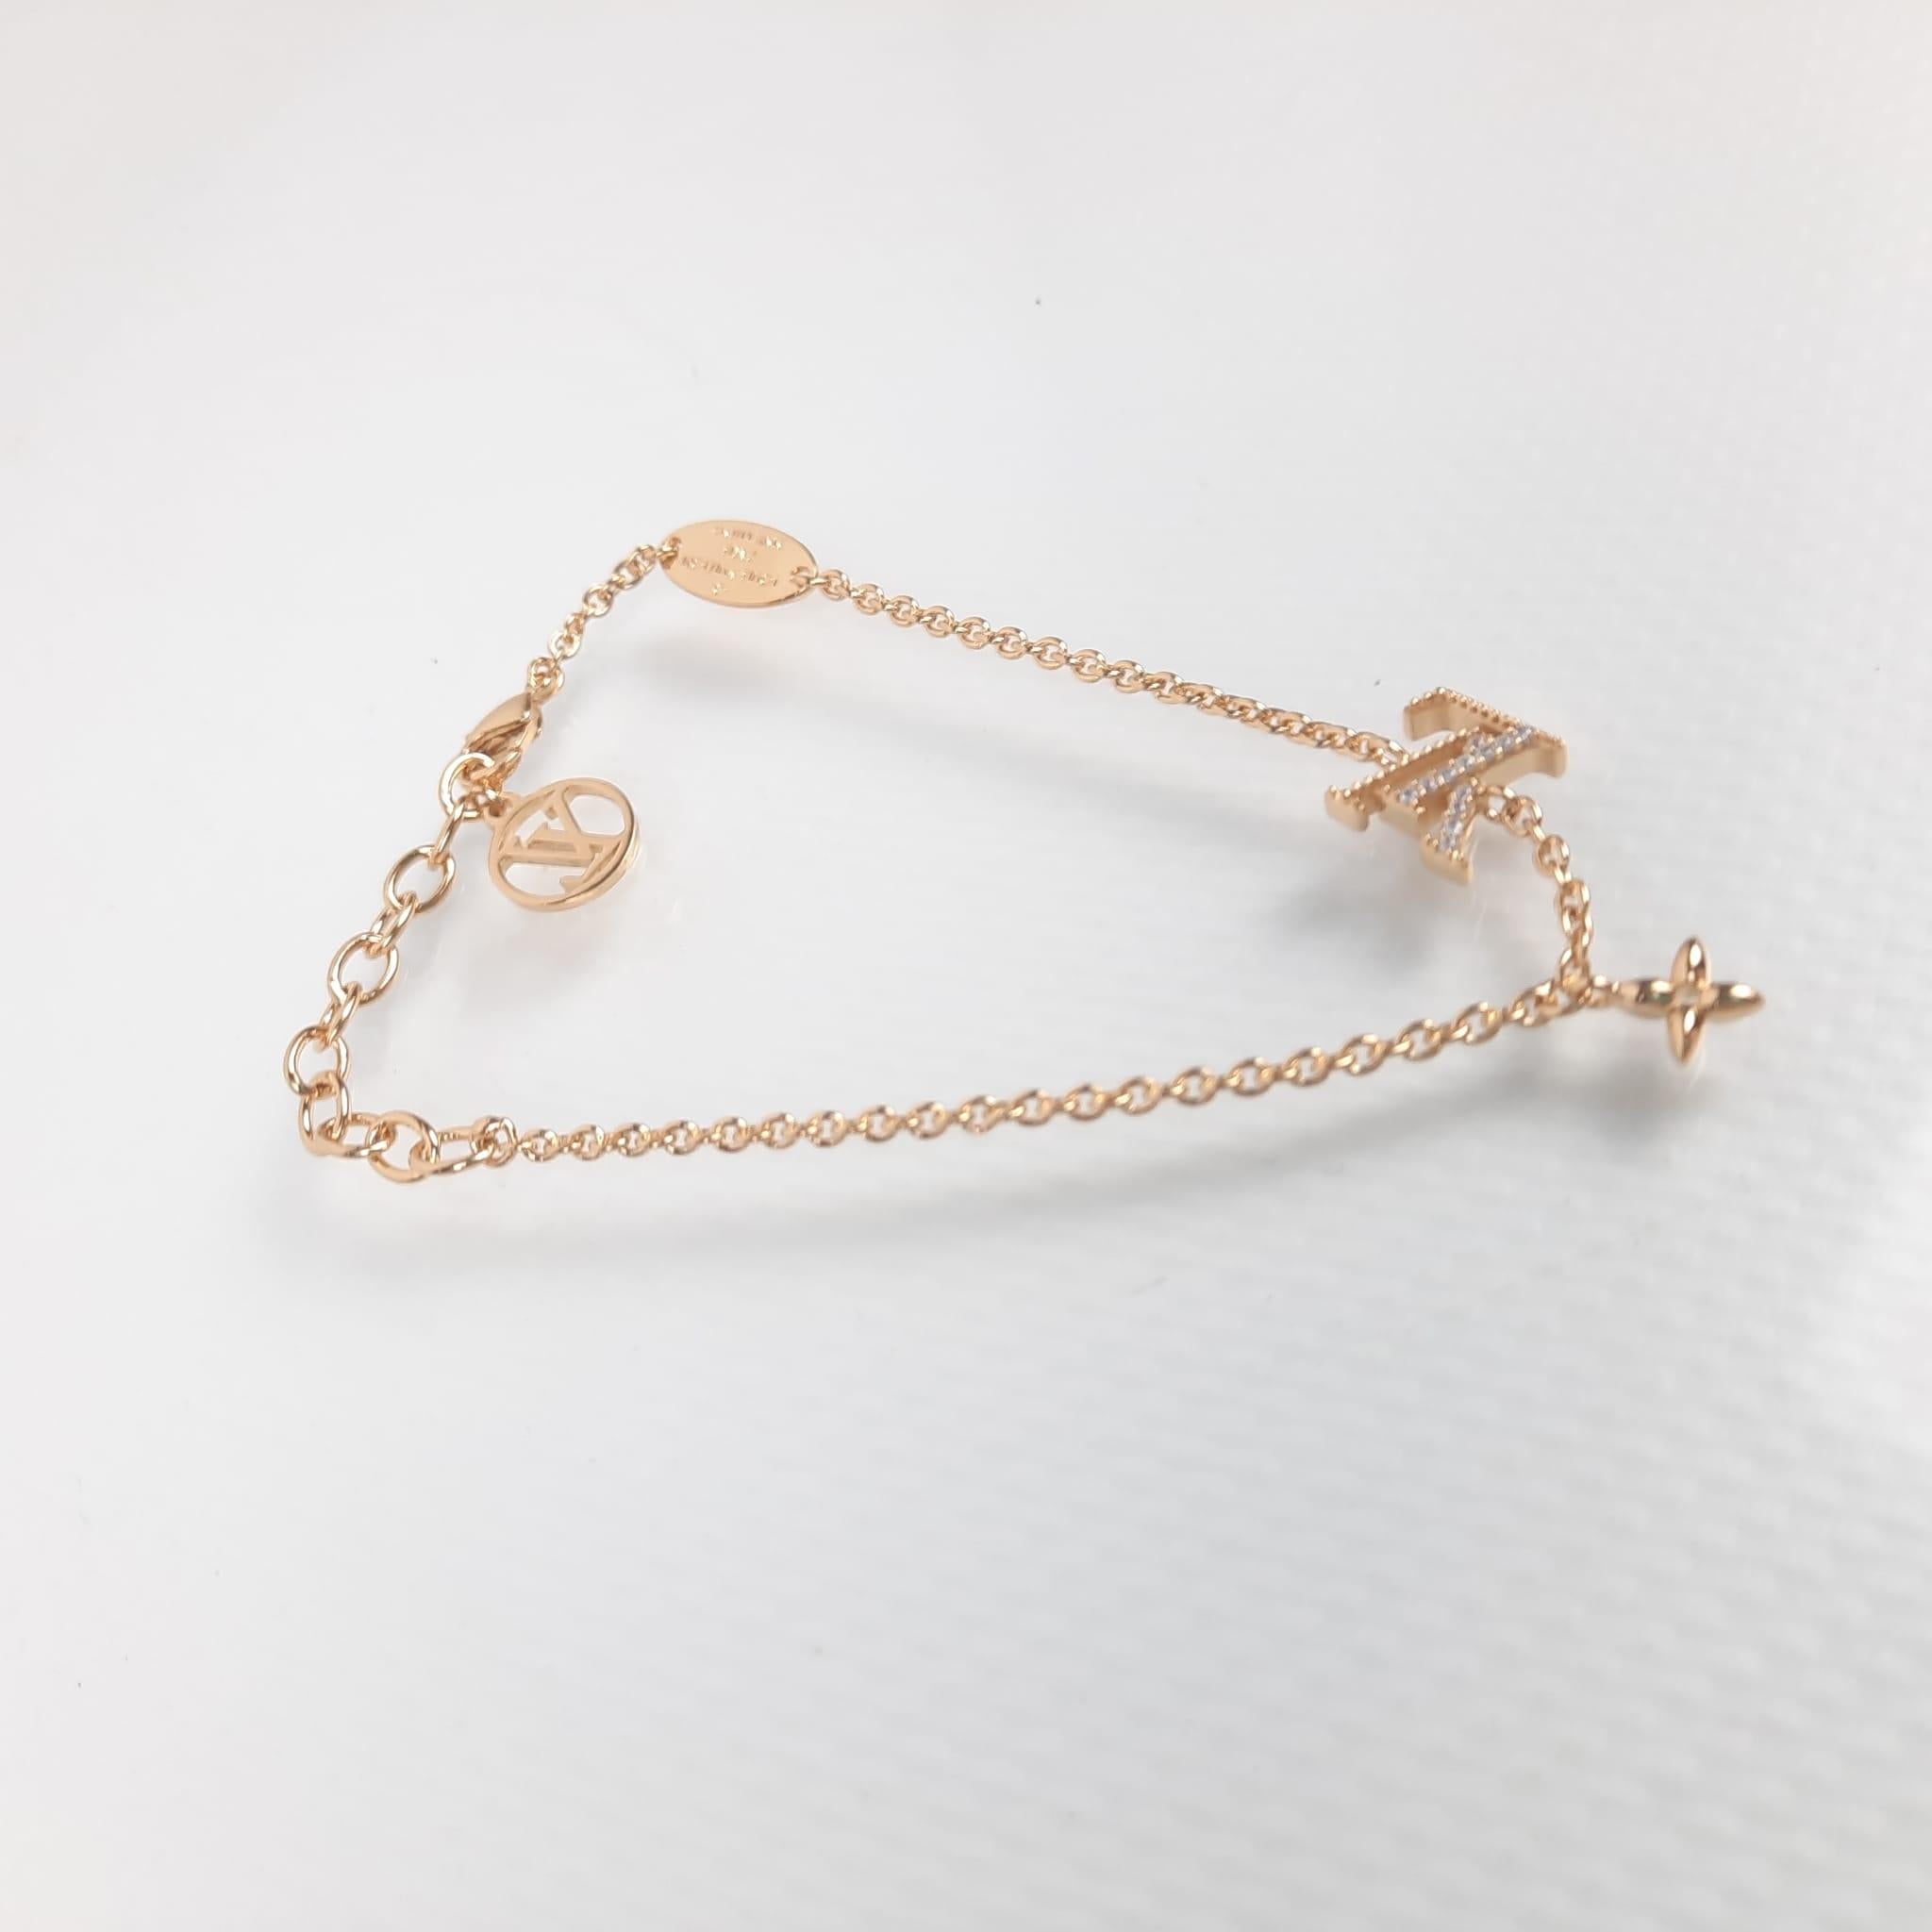 Length: ~15 cm/5.9 inches adjustable, ~19 cm/7.5 inches
Motif size: ~0.9 cm/0.4 inches
Metal with gold-colour finish
Crystal
LV Initials charm
Monogram Flower charm
LV Circle charm
Louis Vuitton signature engraving